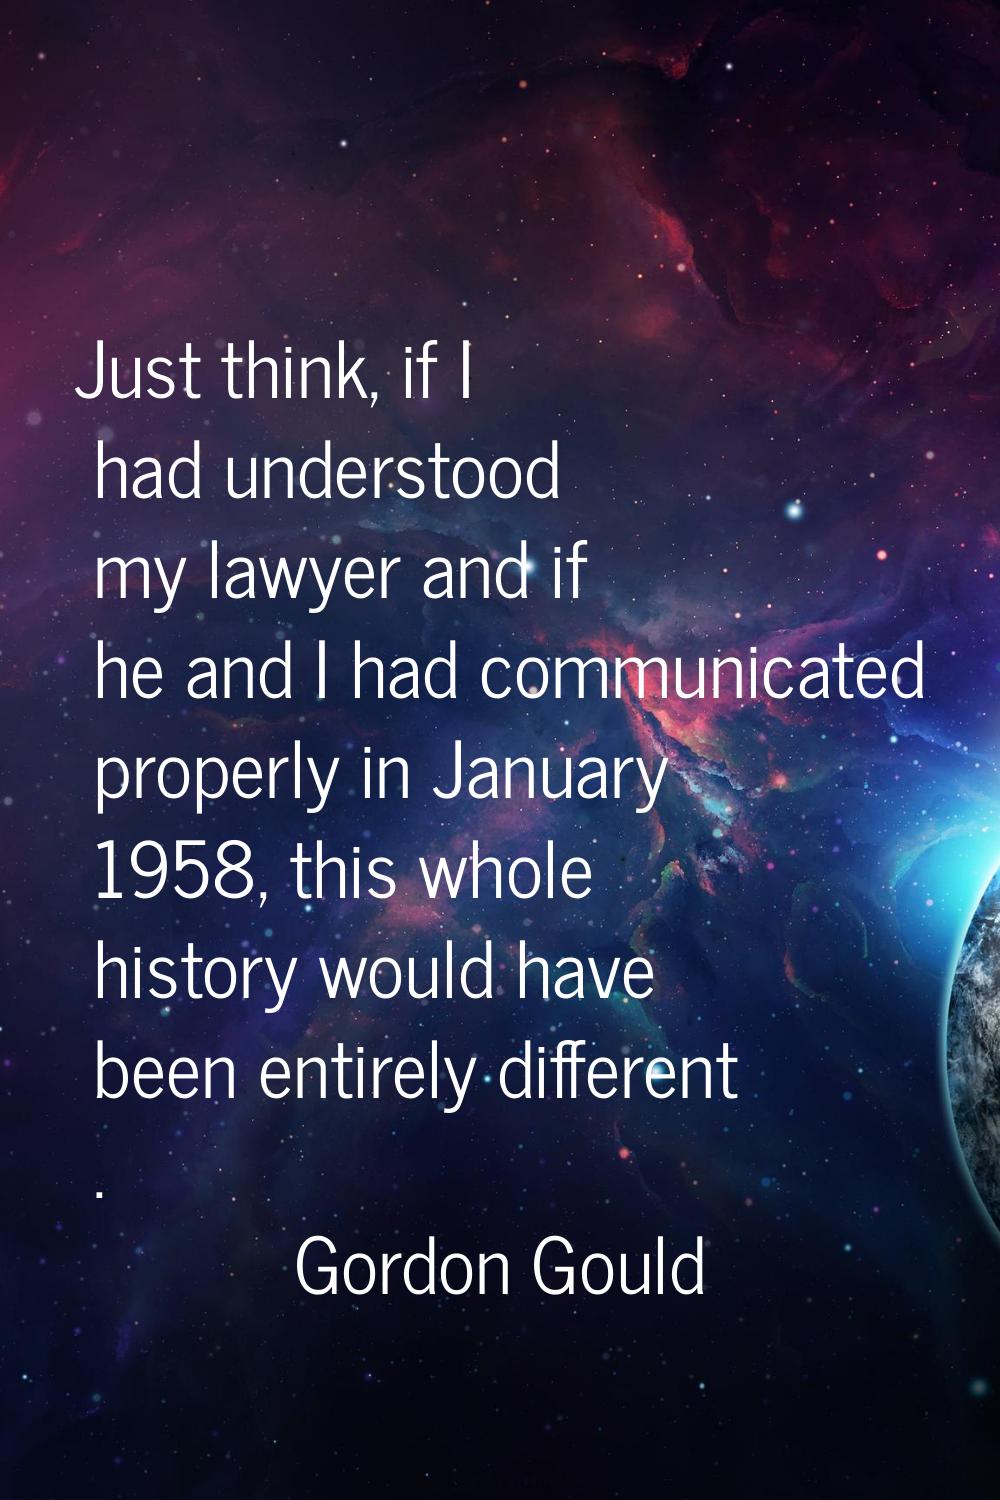 Just think, if I had understood my lawyer and if he and I had communicated properly in January 1958